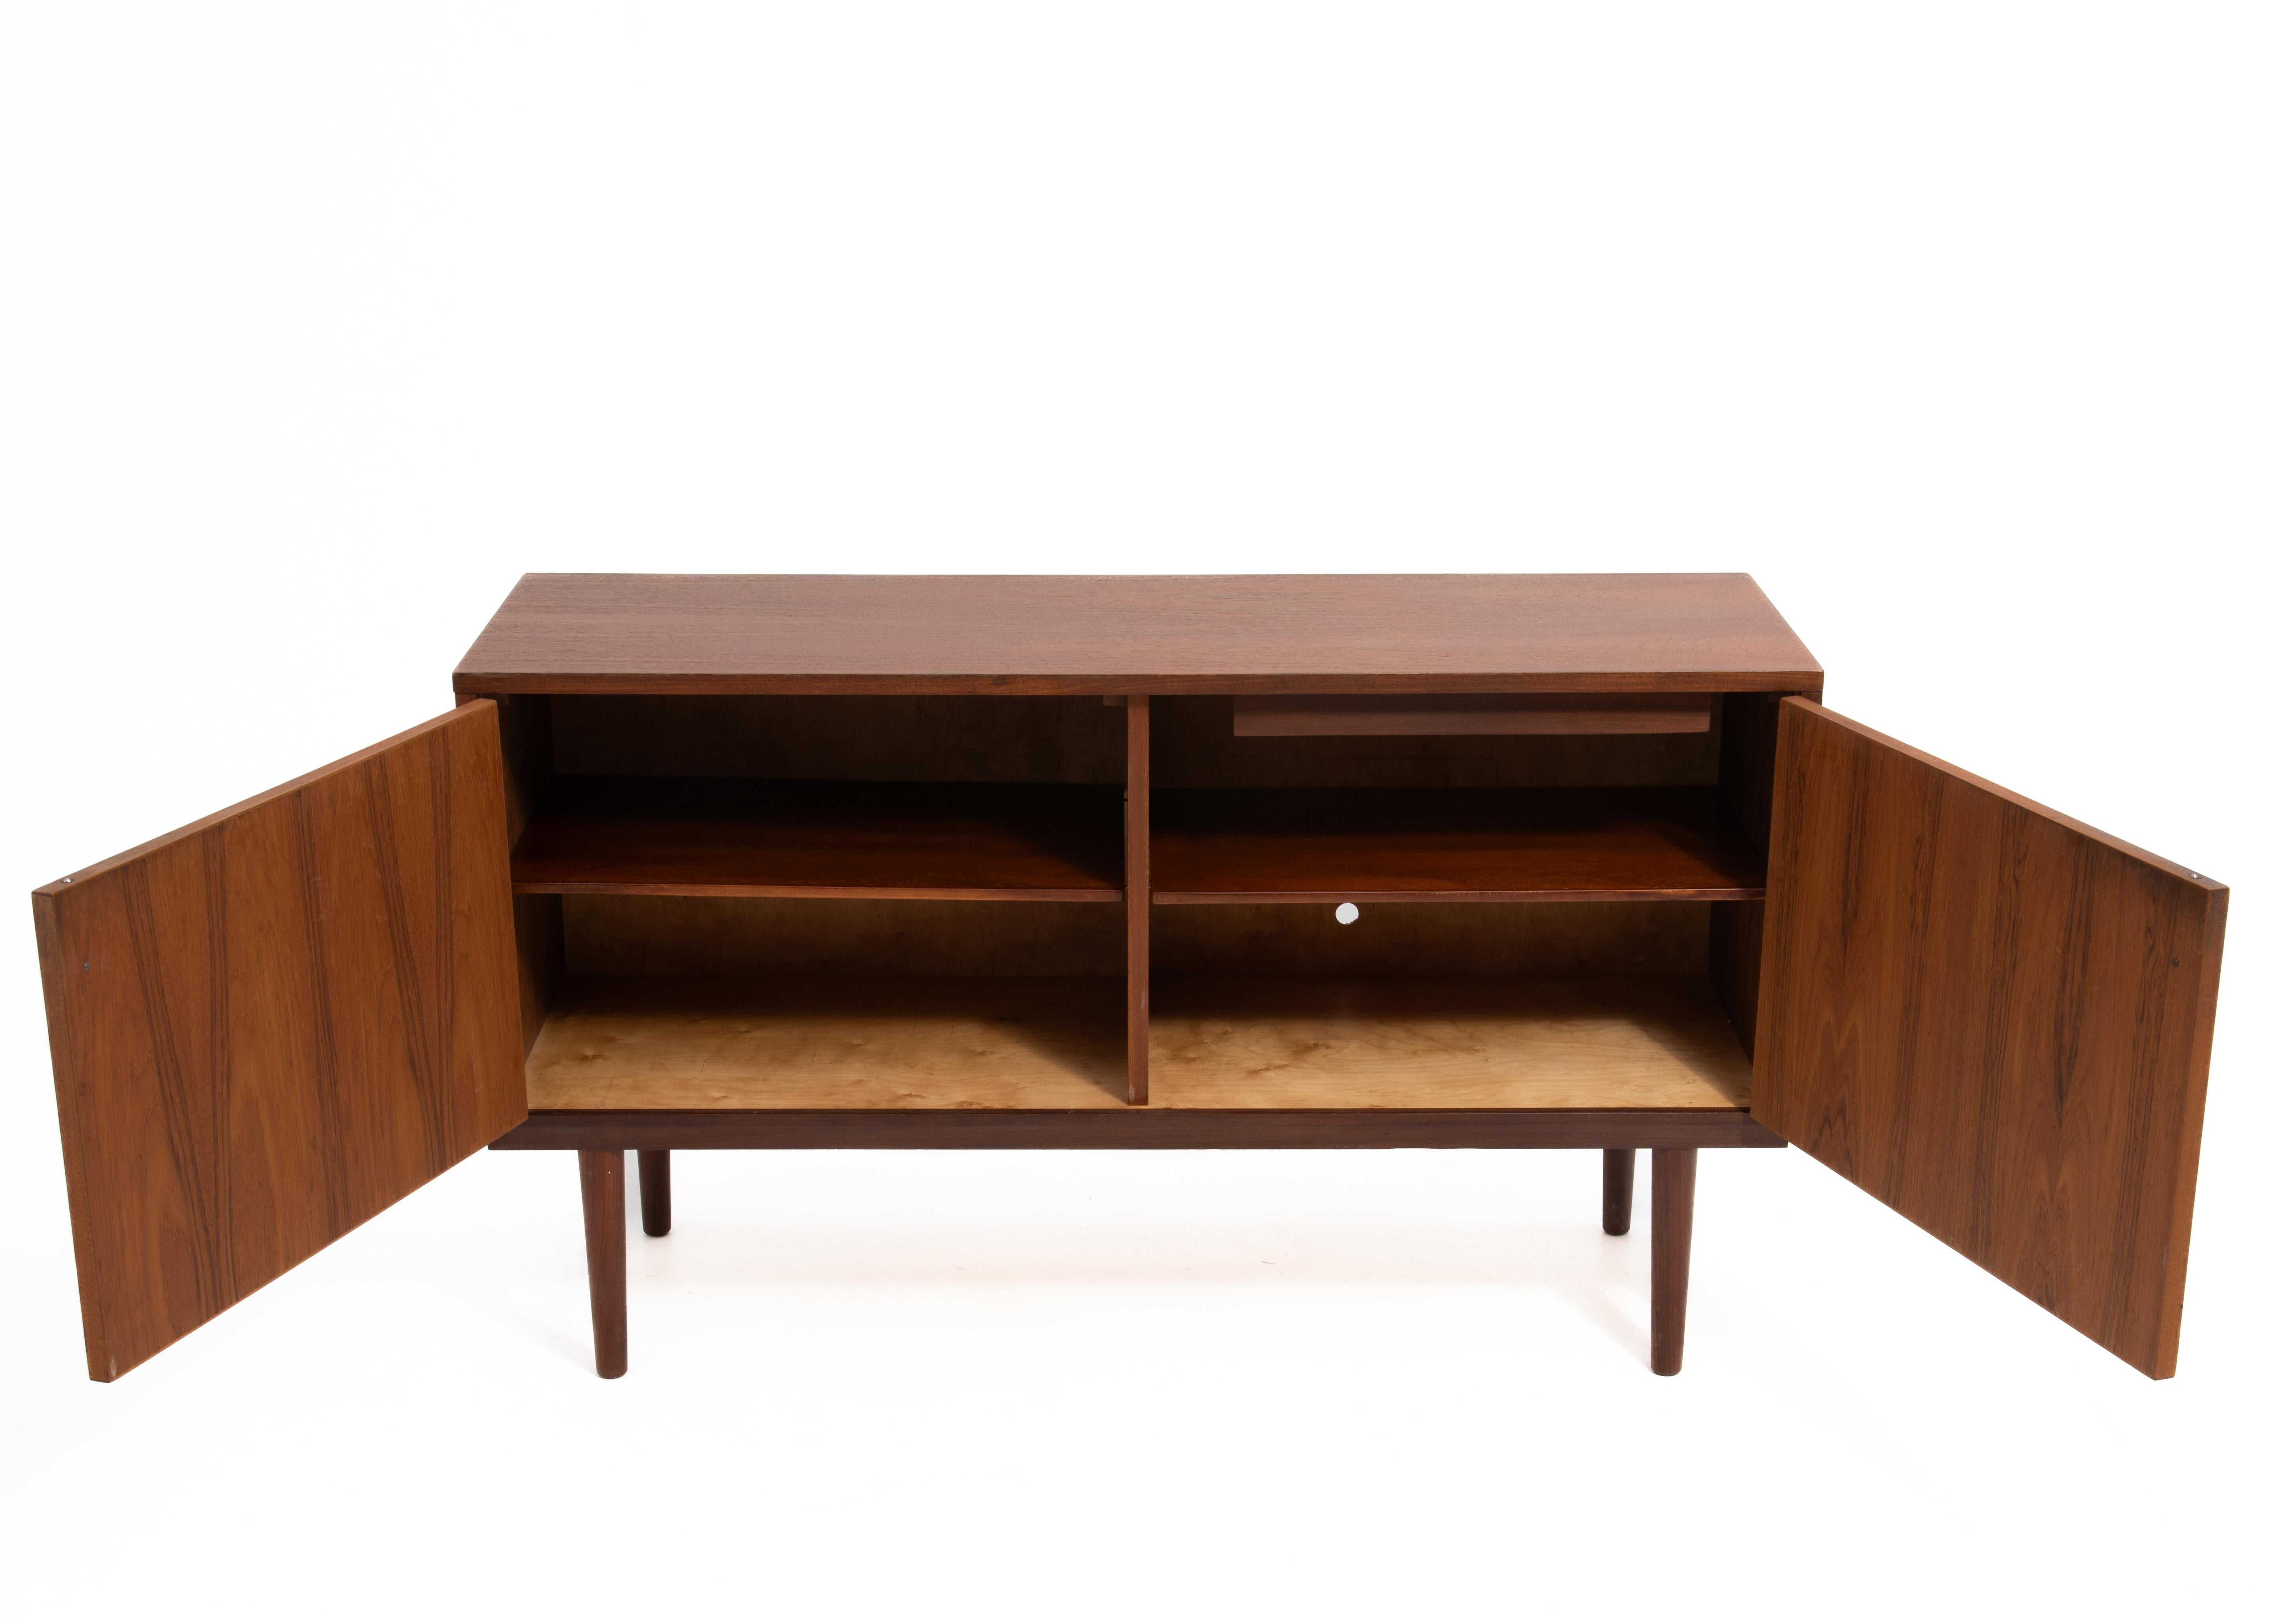 A petite teak credenza designed by Hans Olsen and made in Denmark. A great size that works in a living room as an entertainment console  or dining room as a buffet/credenza. The two doors open from the center to reveal adjustable shelves. Fully